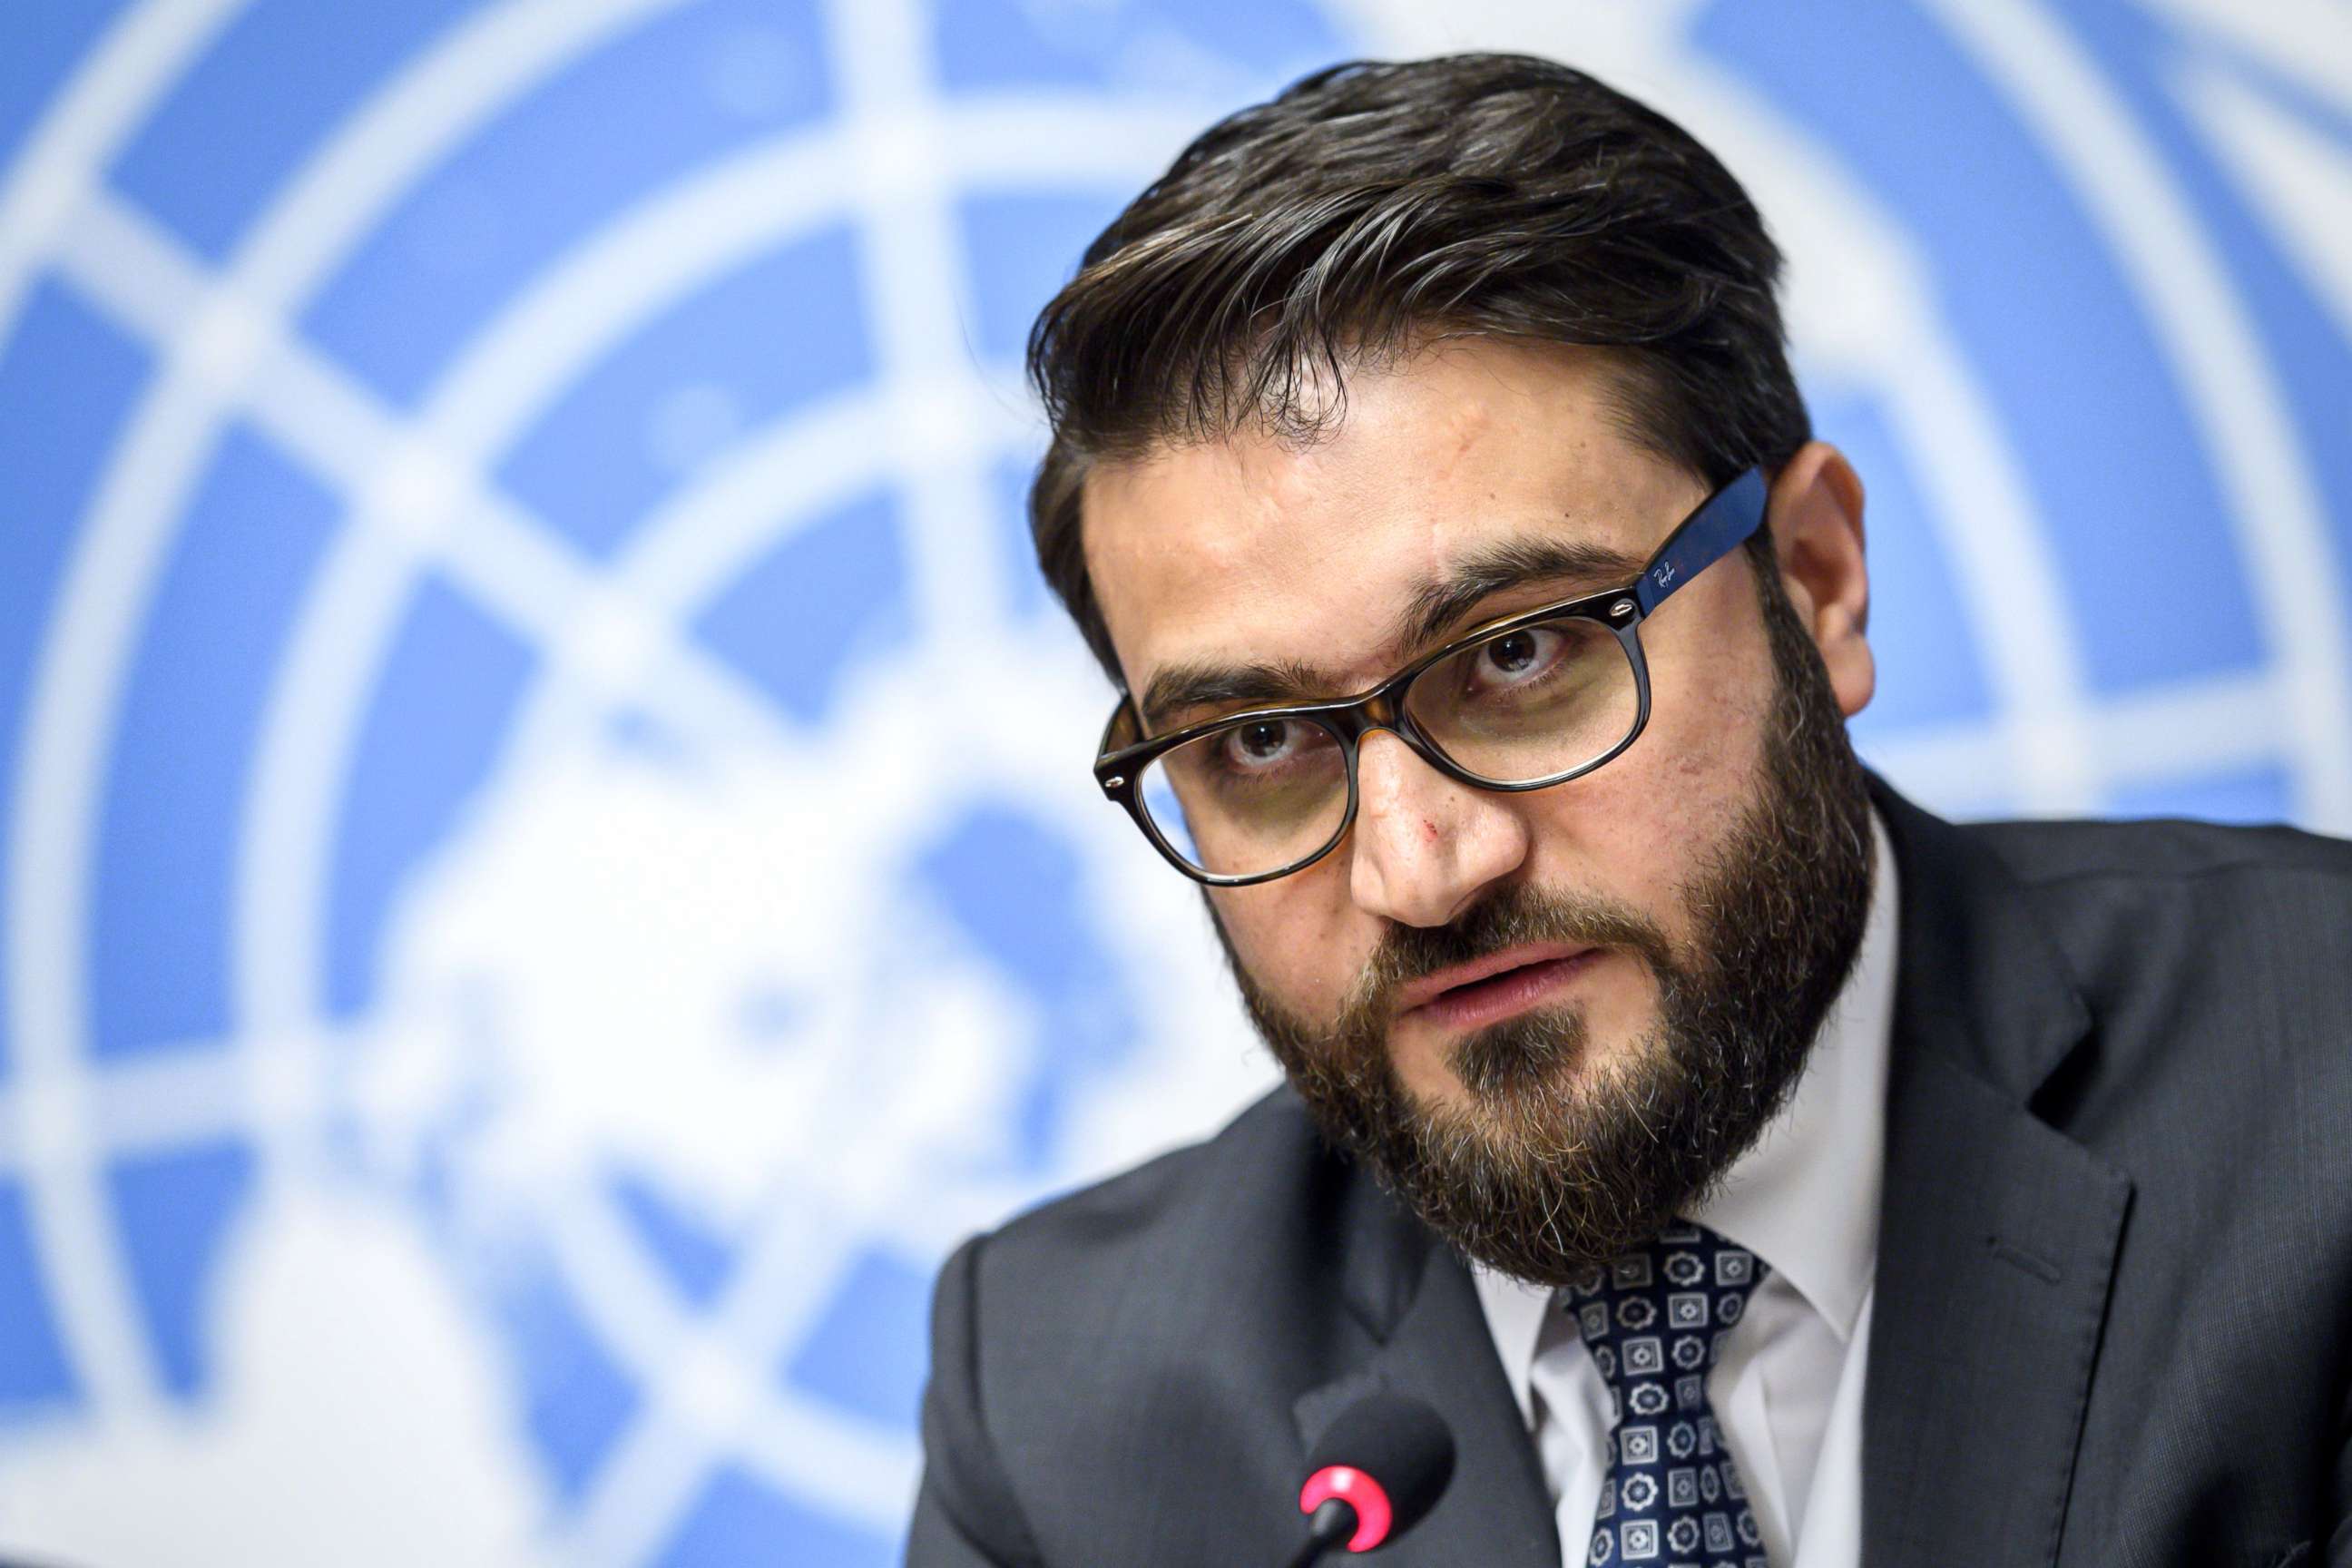 PHOTO: Afghanistan's National Security Adviser Hamdullah Mohib attends a press conference closing a two-day United Nations Conference on Afghanistan in Geneva, Nov. 28, 2018.